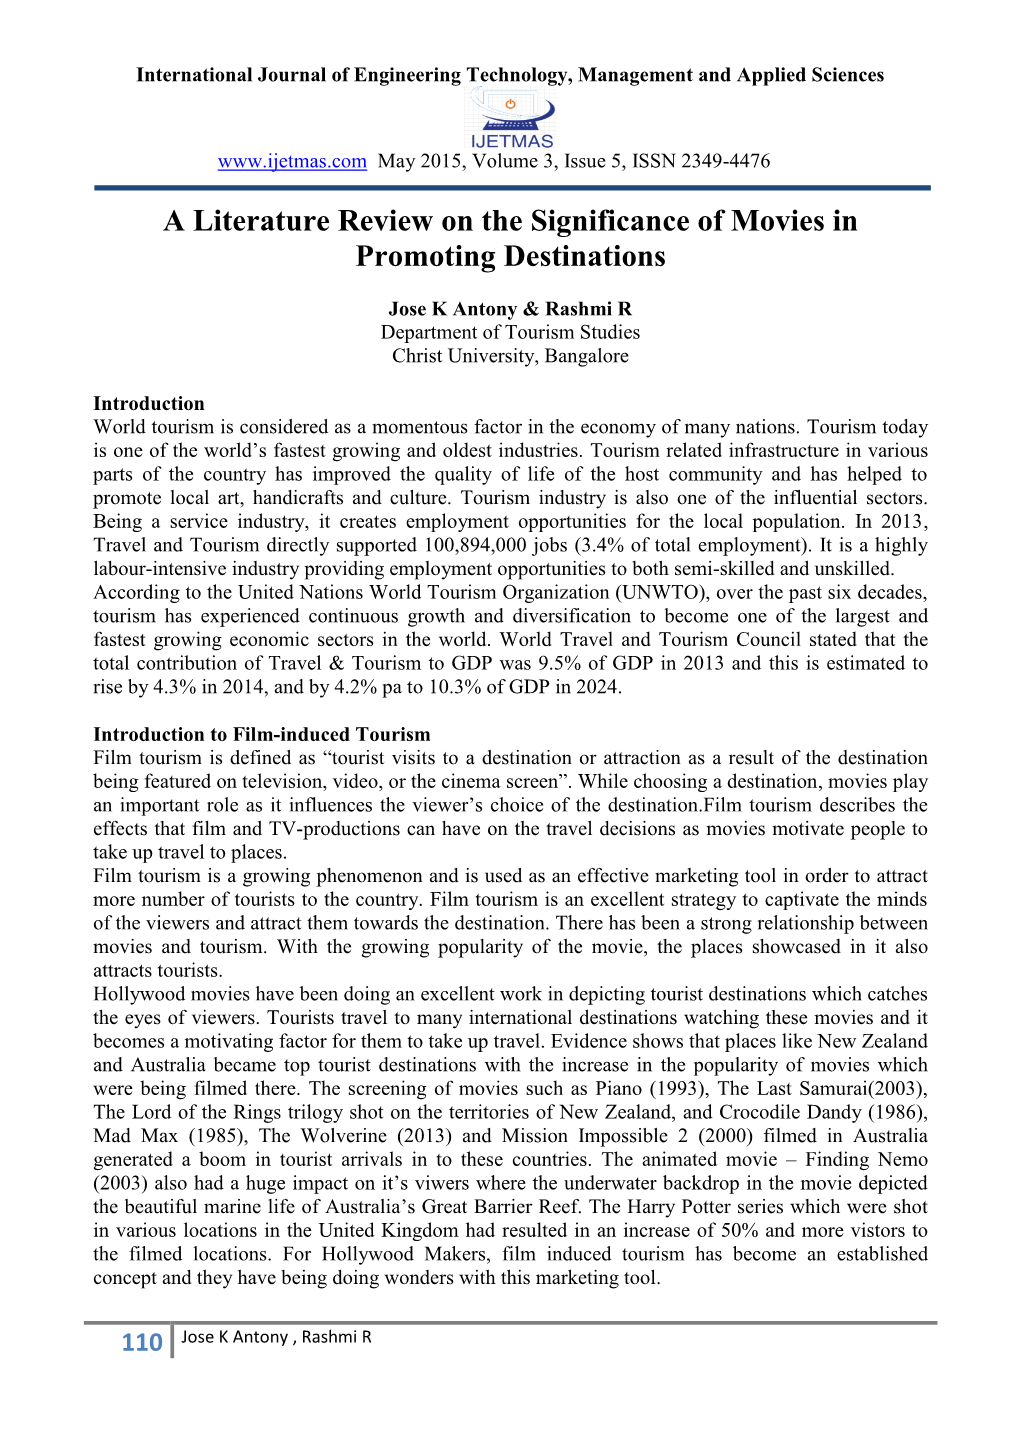 A Literature Review on the Significance of Movies in Promoting Destinations